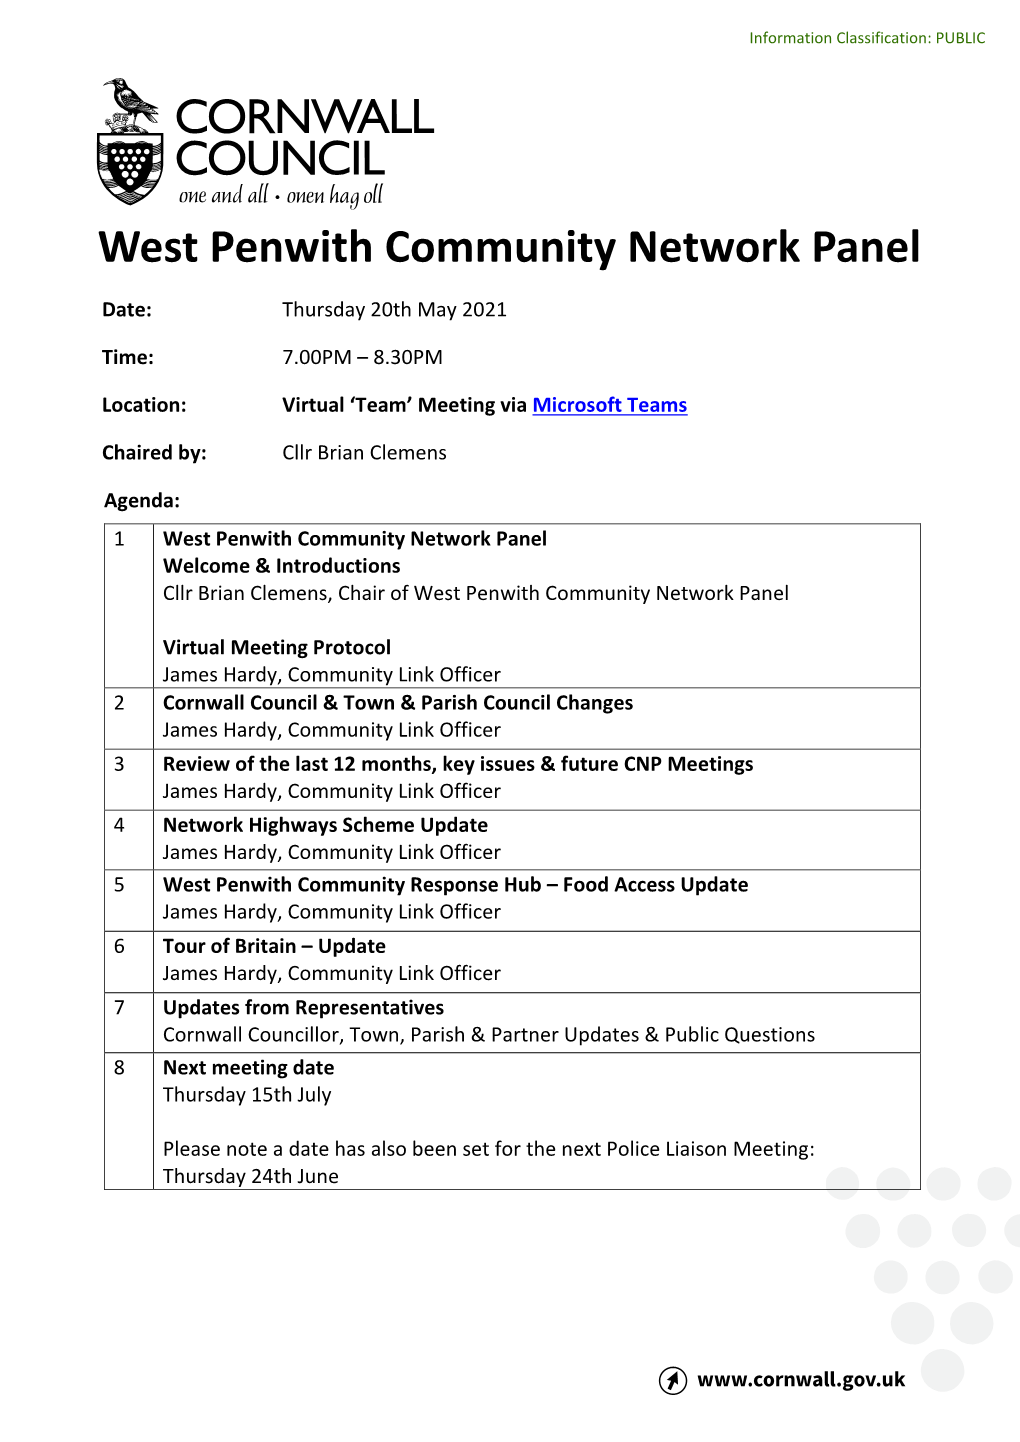 West Penwith Community Network Panel